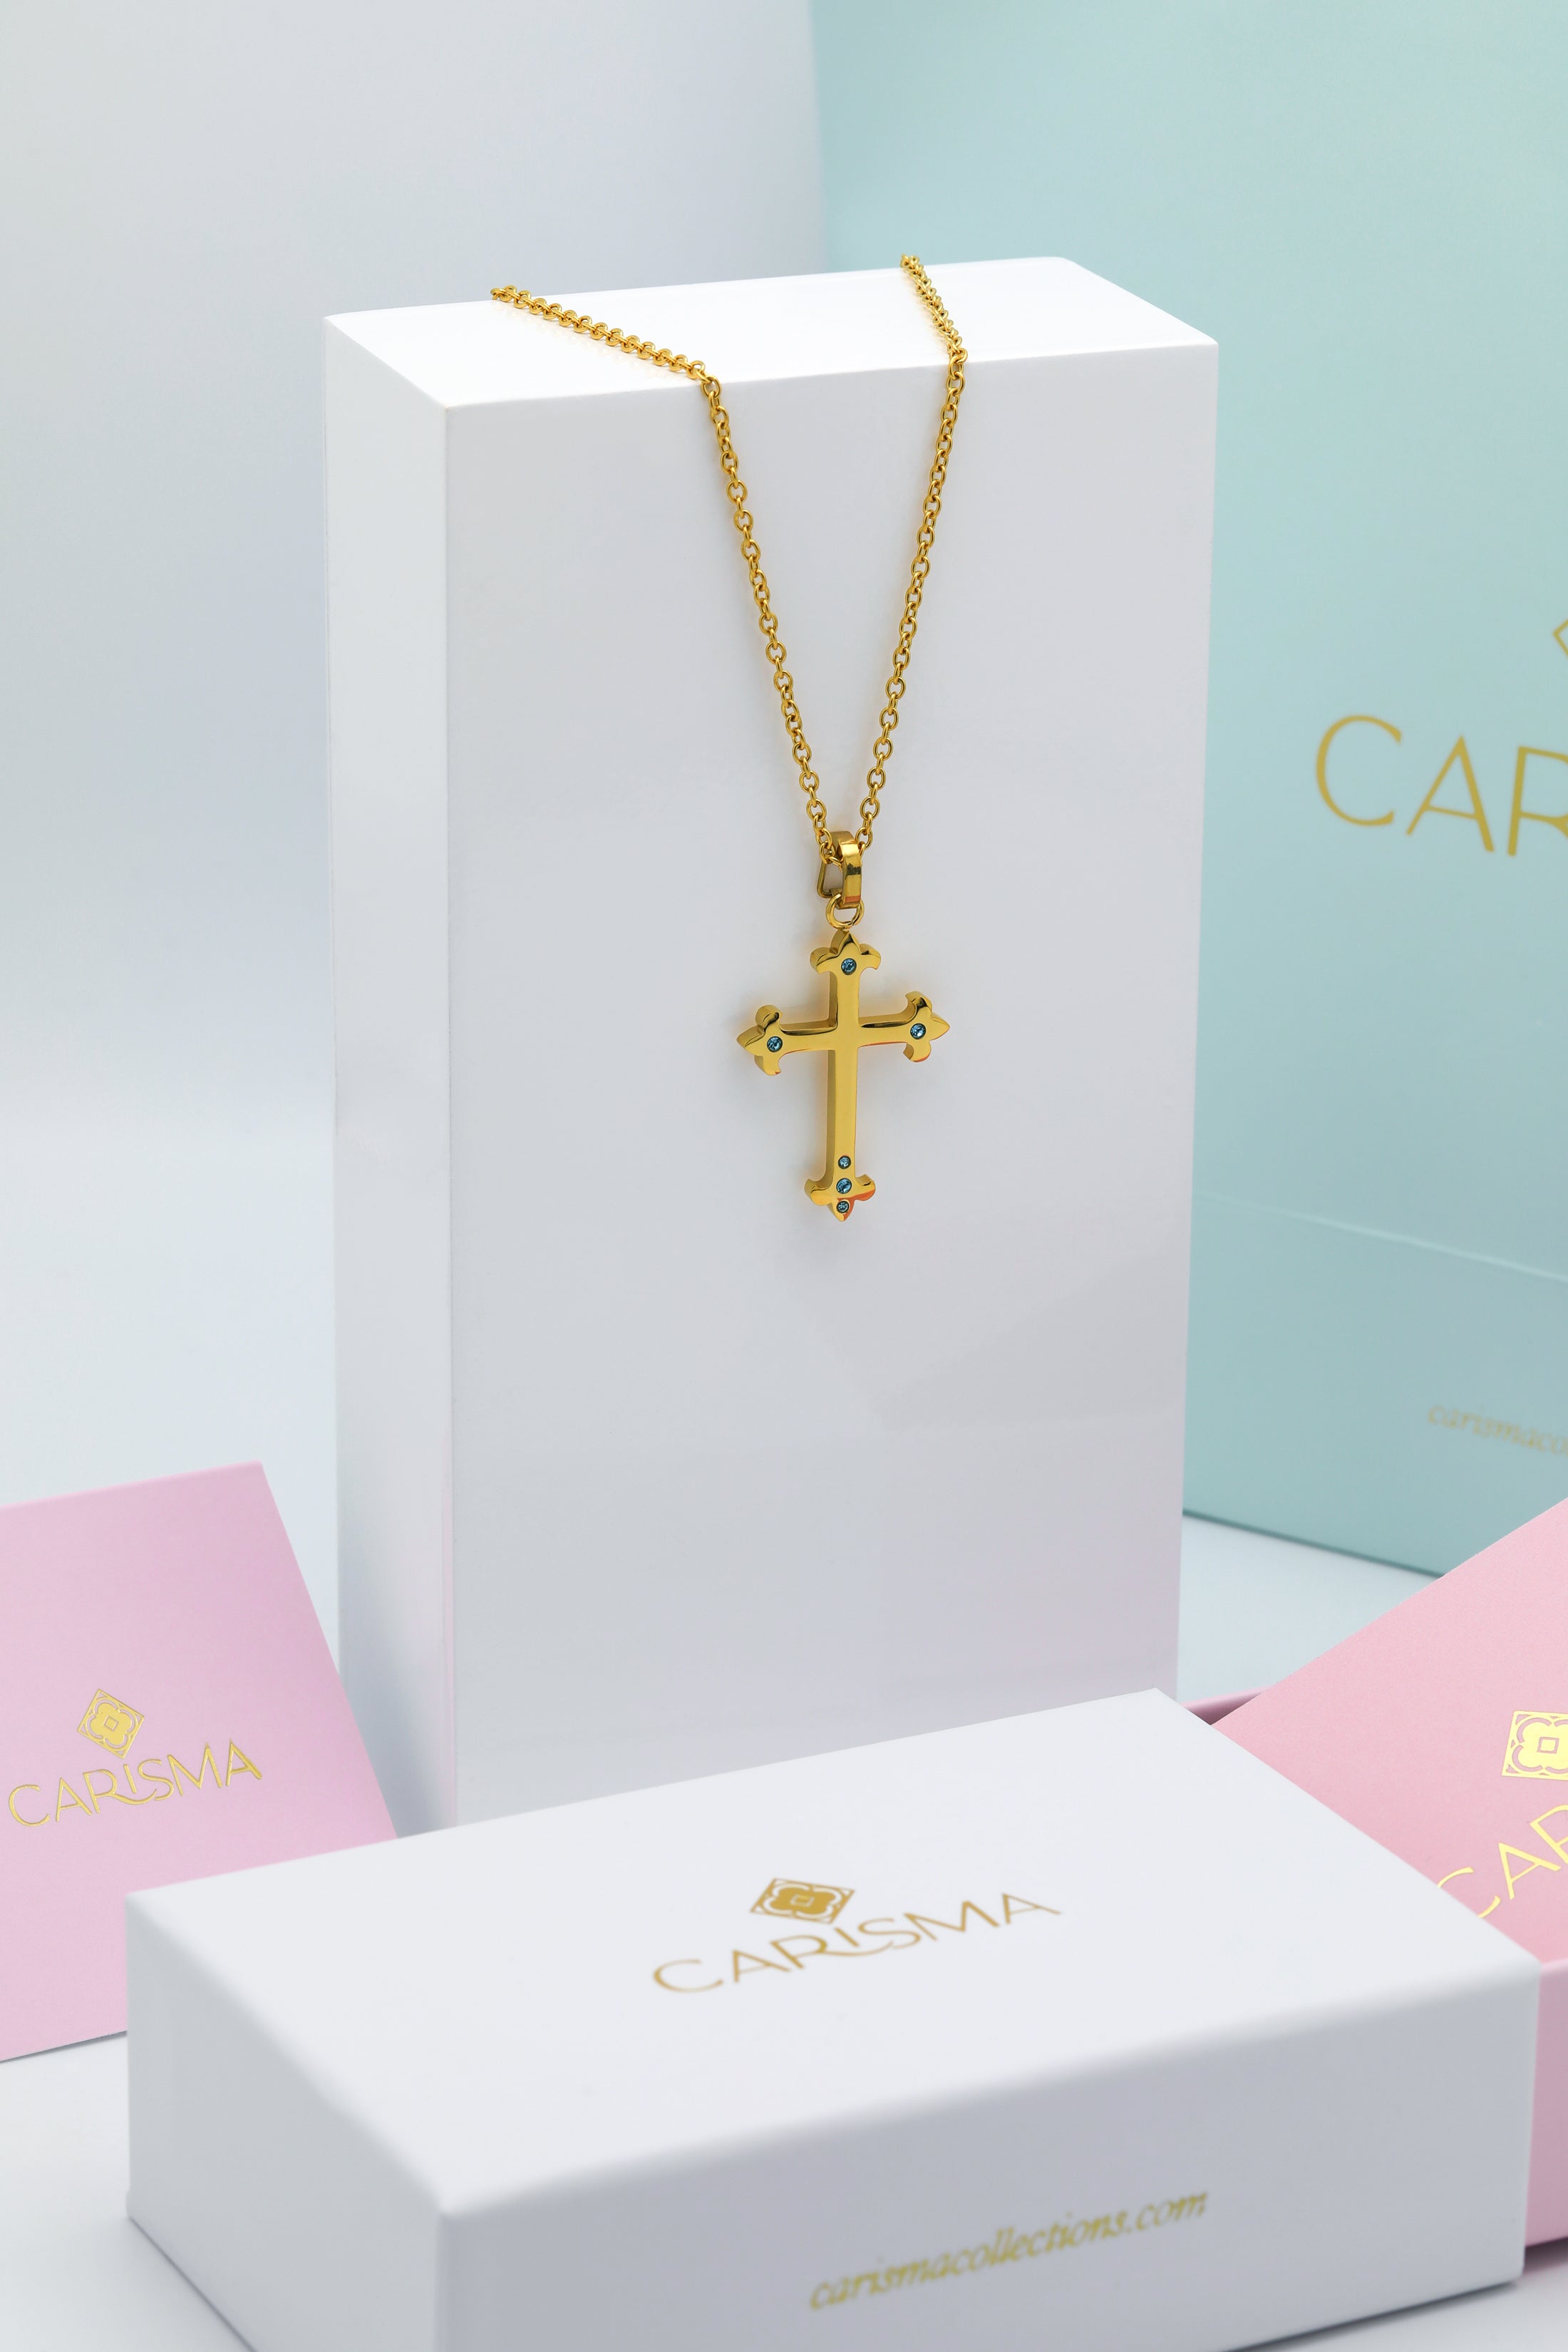 Blue Crystals Carisma Cross Necklace Gift Set